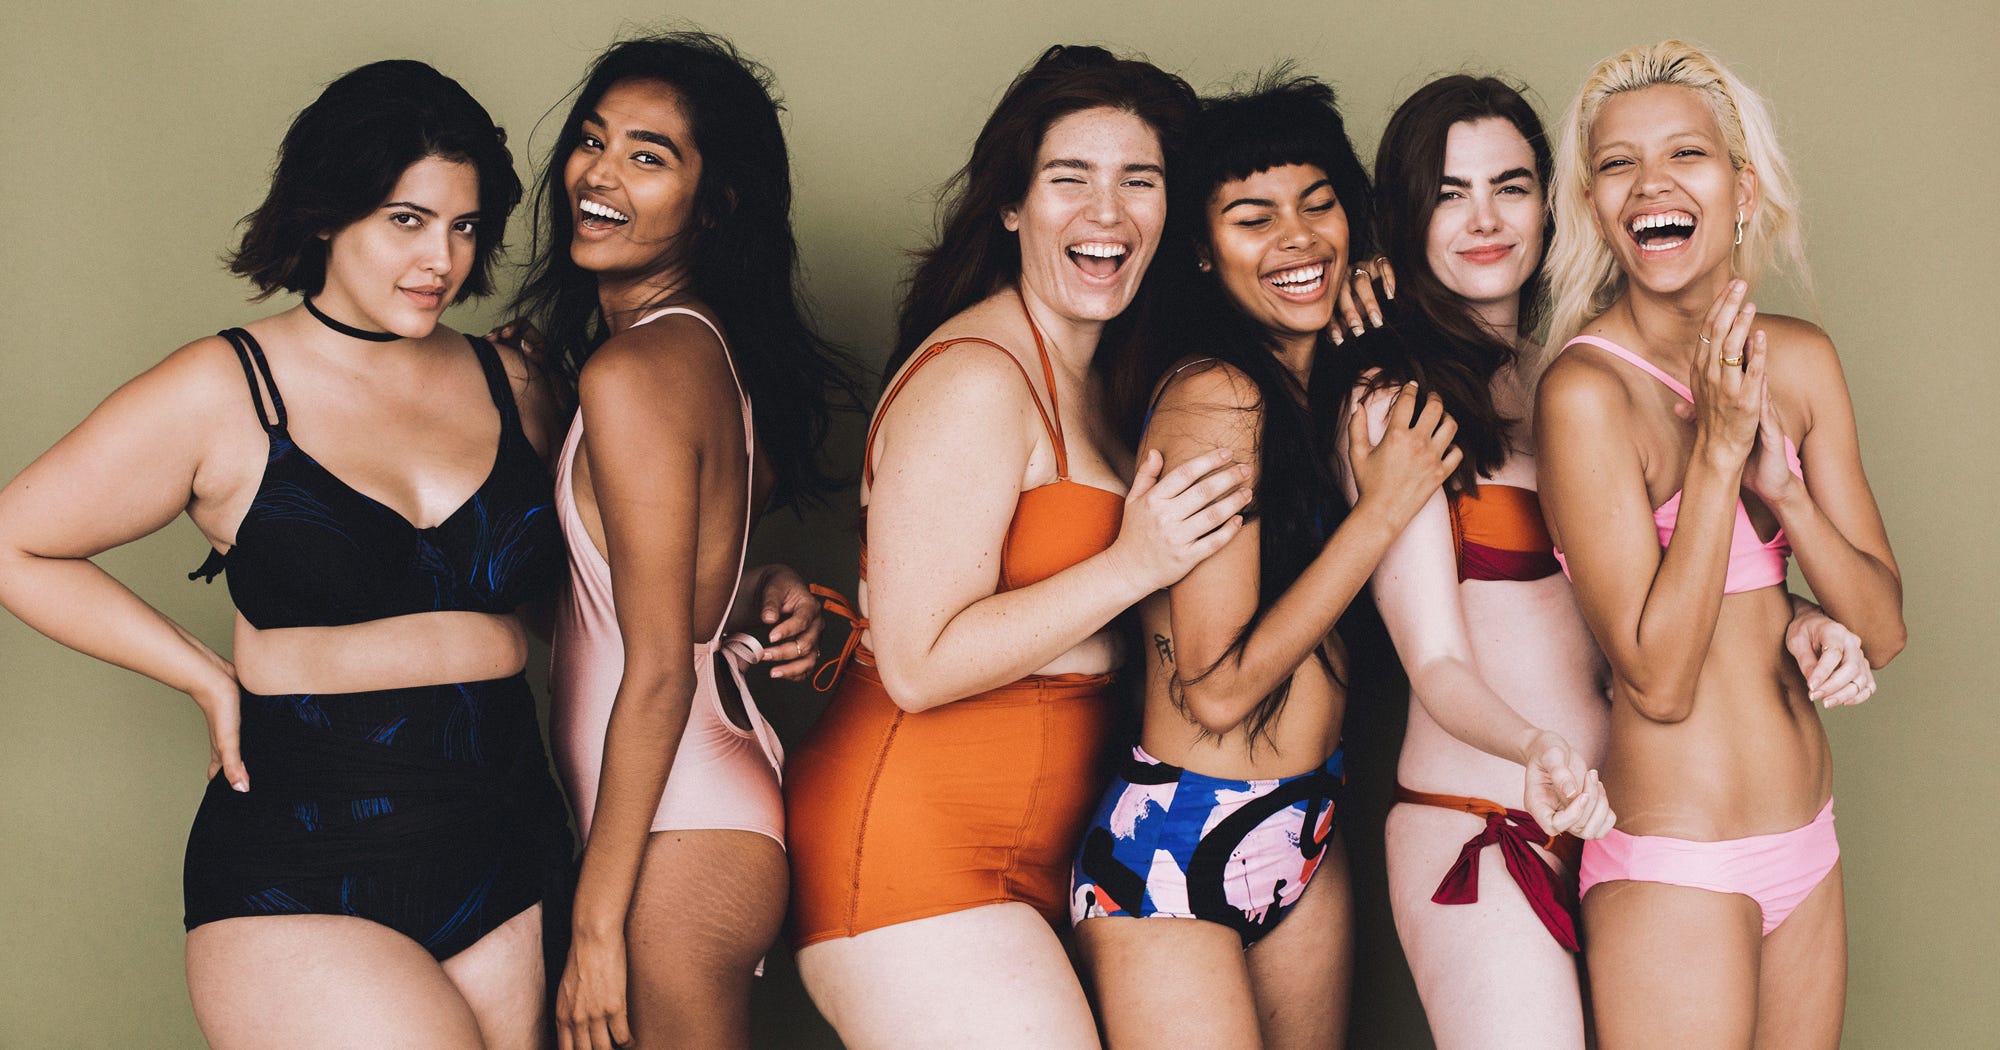 THE IMPORTANCE OF 'BODY DIVERSITY'